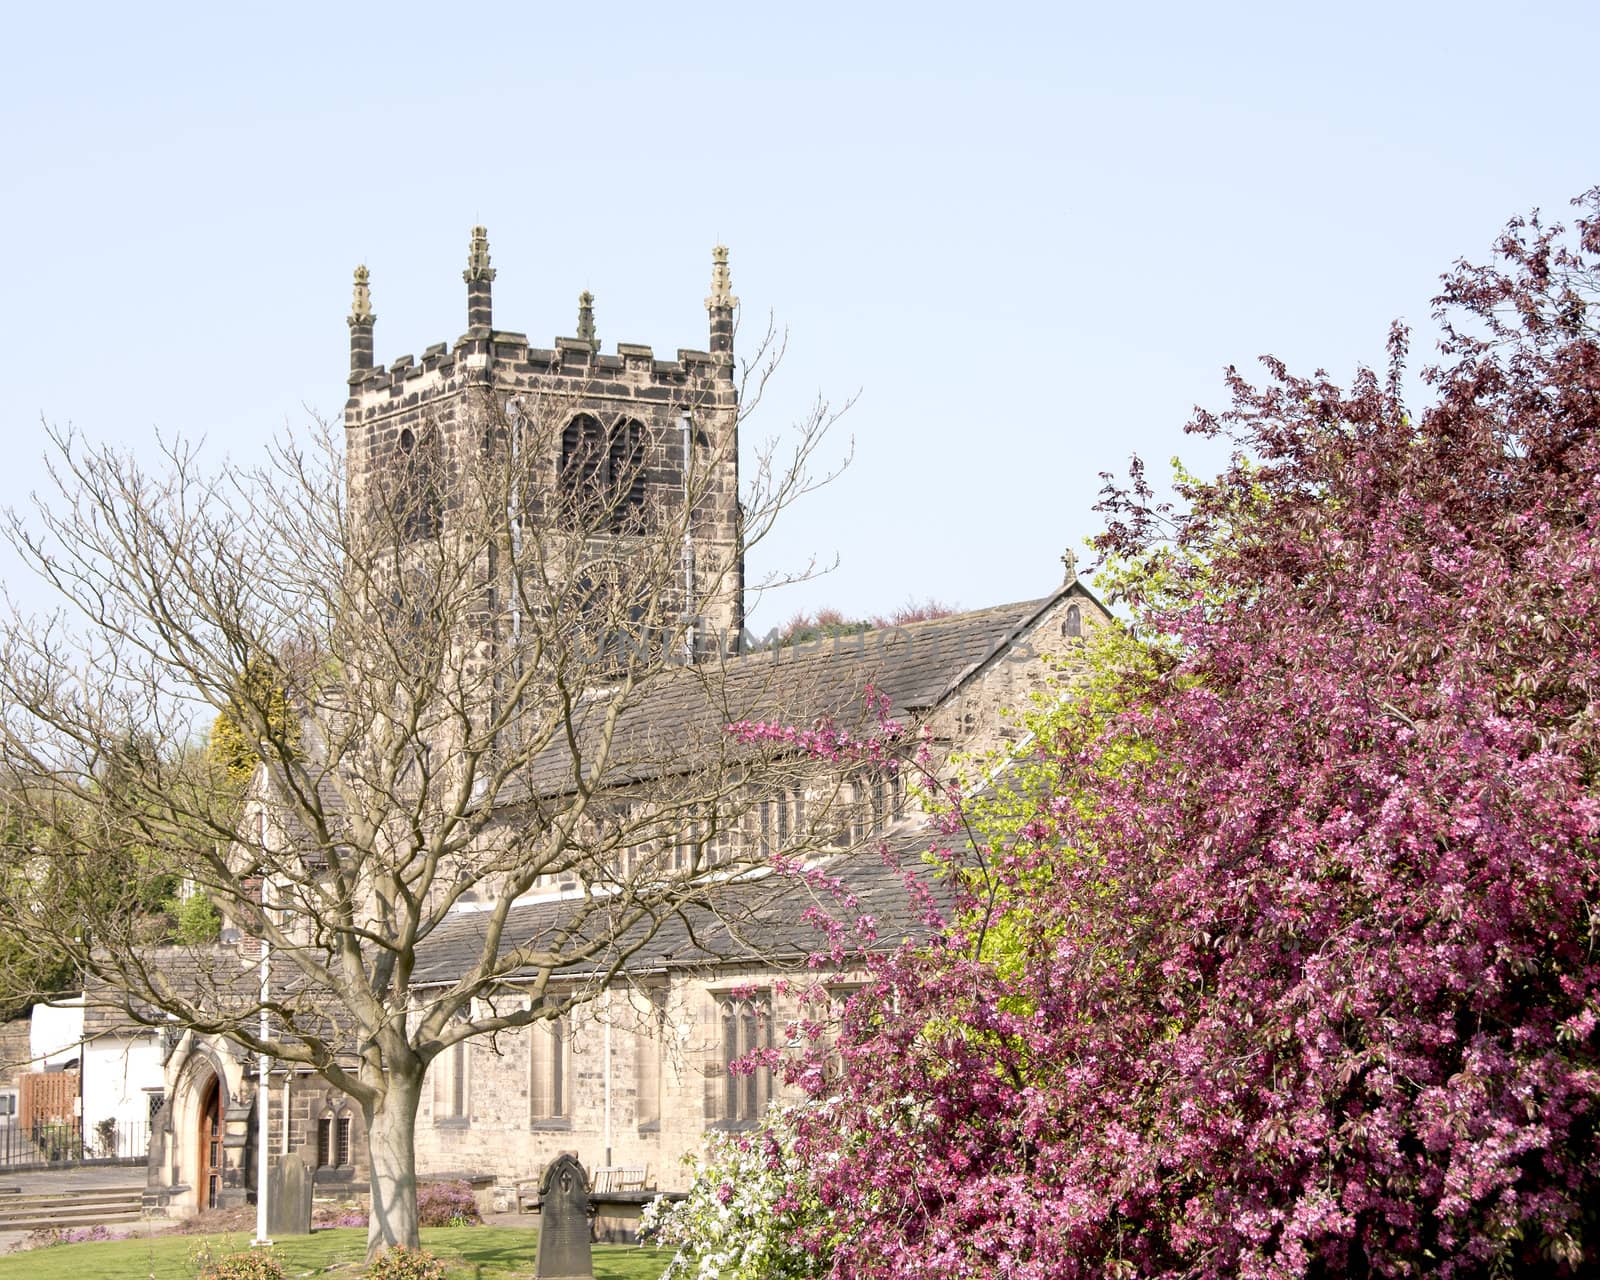 A Sixteenth Century Church in Yorkshire and a beautiful Flowering Cherry Trree